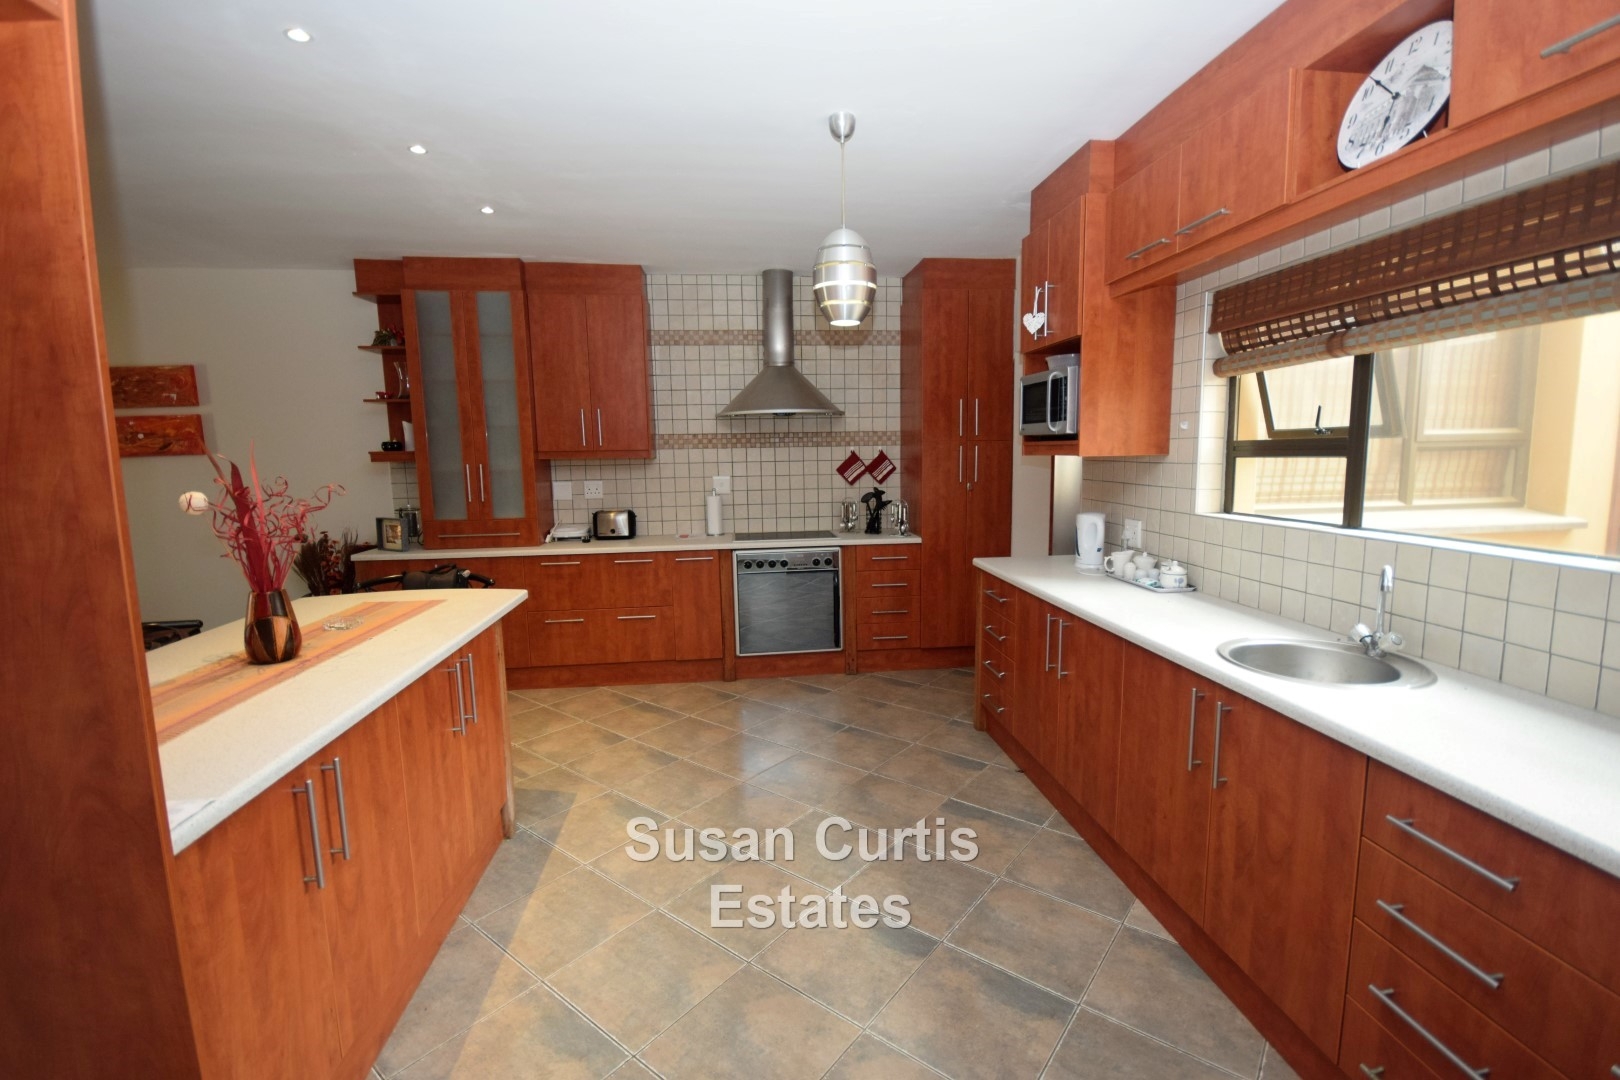 SPACIOUS KITCHEN WITH LOTS OF CUPBOARDS